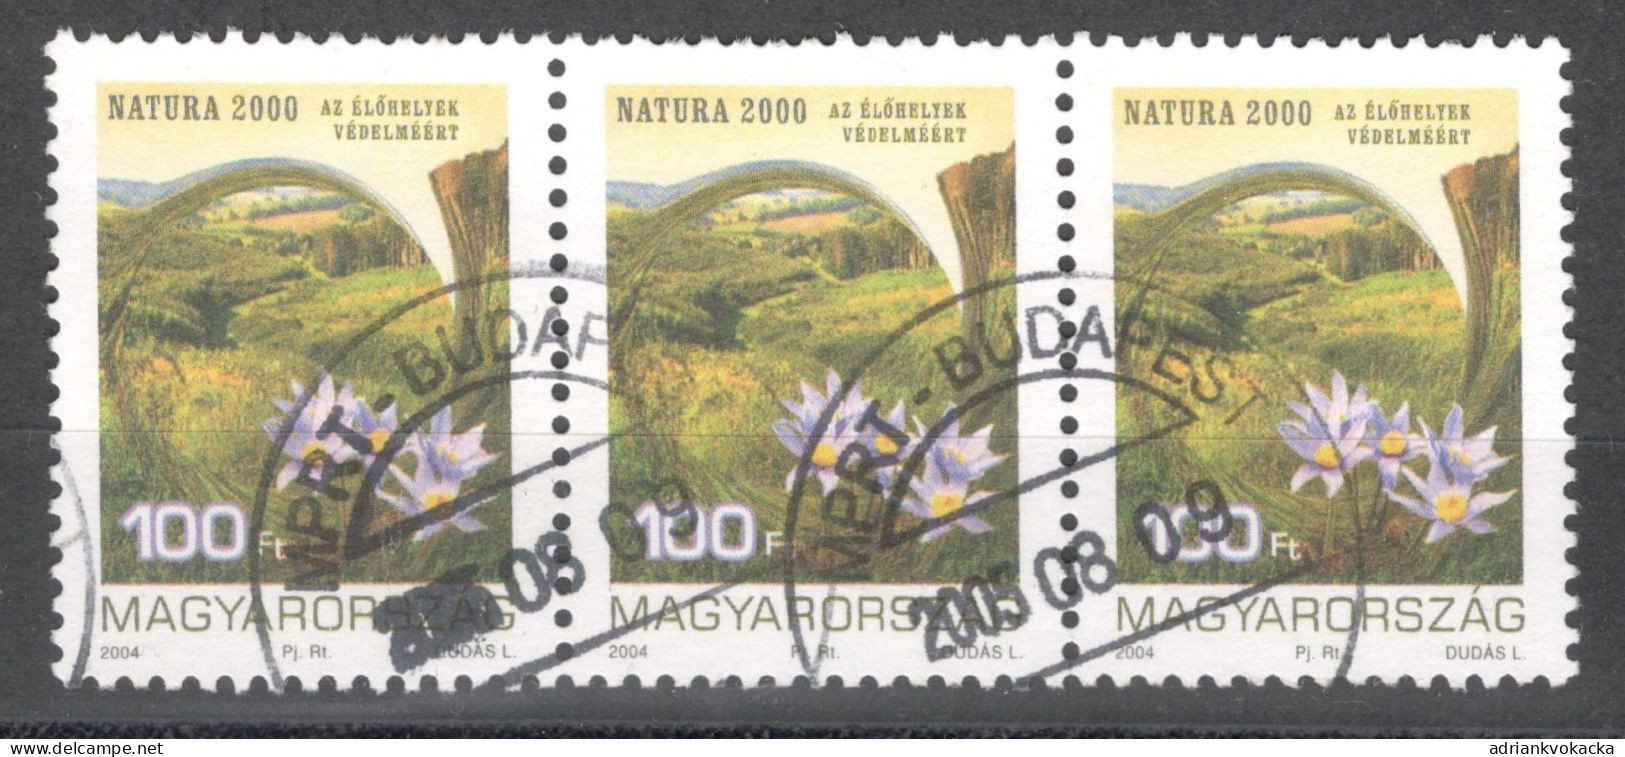 Hungary - Nature Conservation, Stamped Mi:HU 4992 (2004) - Used Stamps